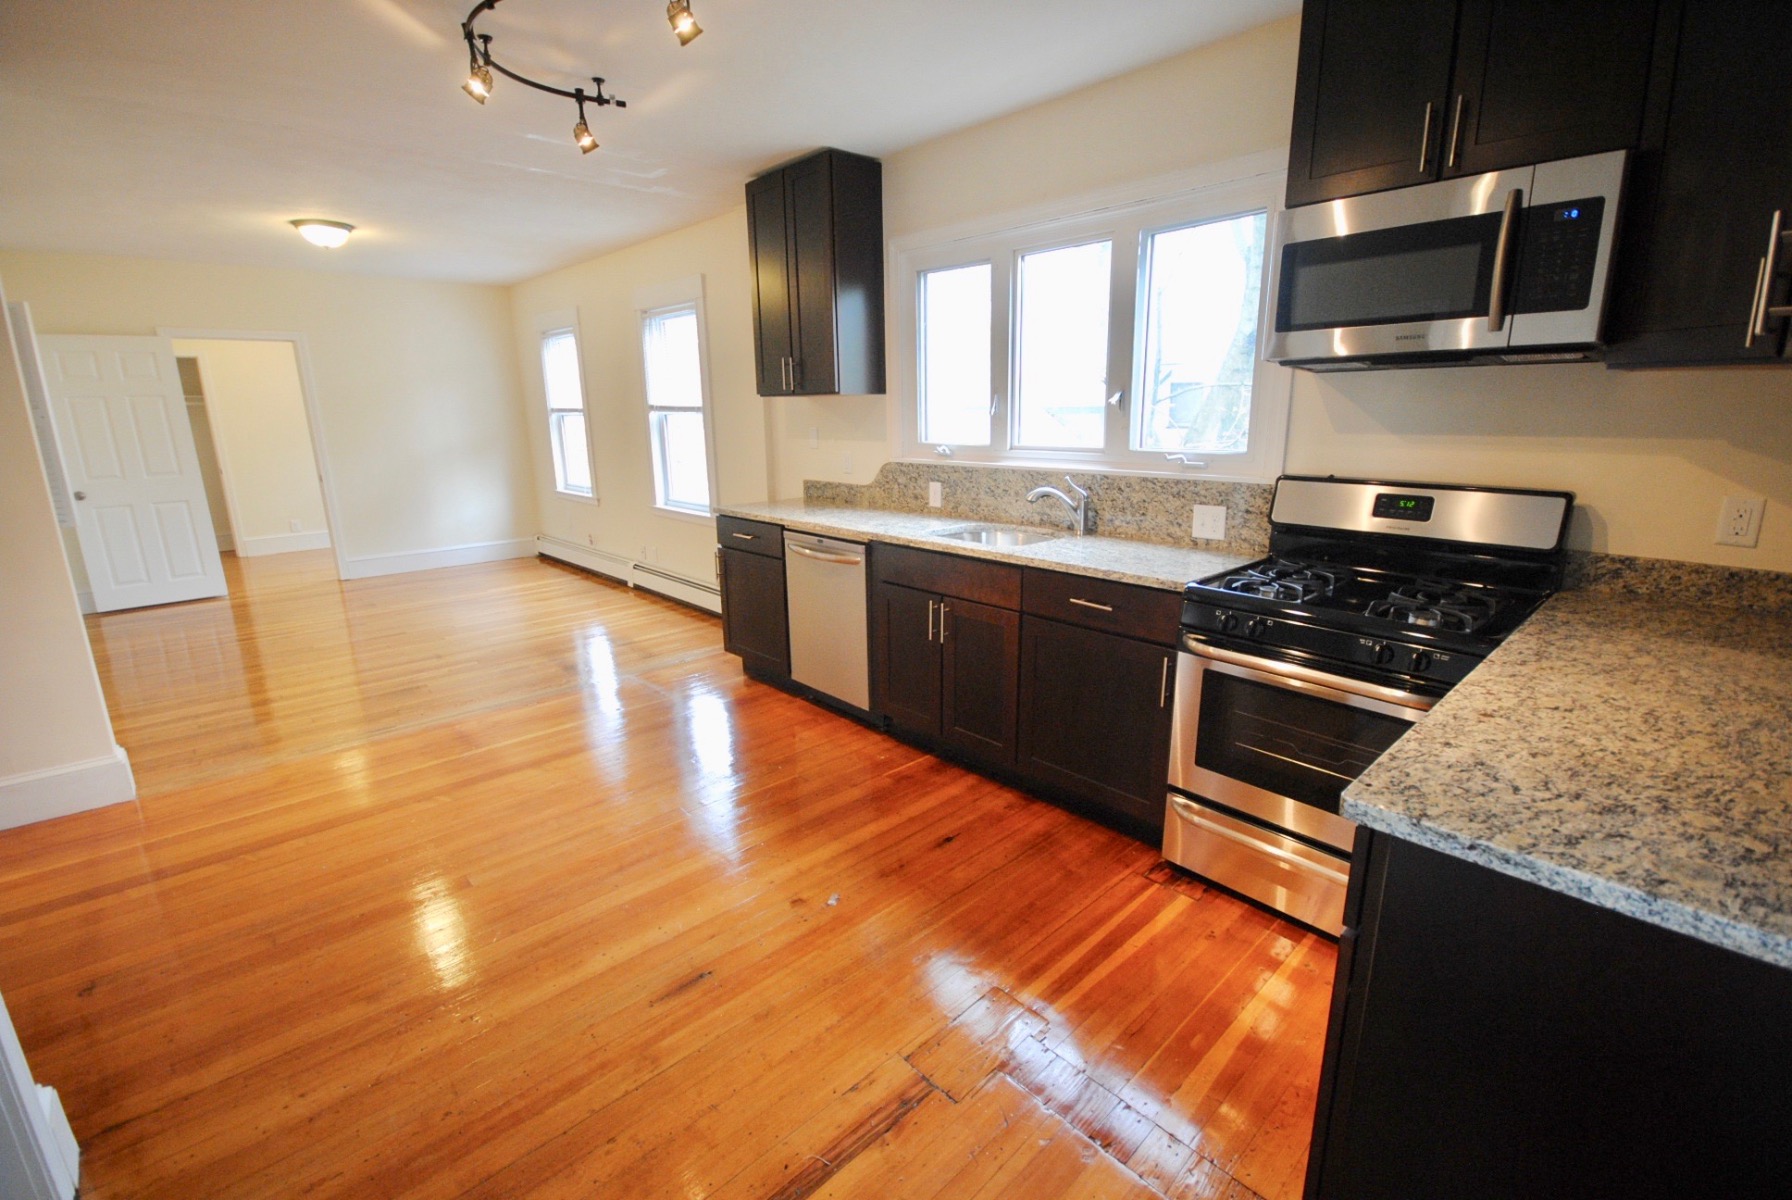 Photos of apartment on Taylor St.,Medford MA 02155